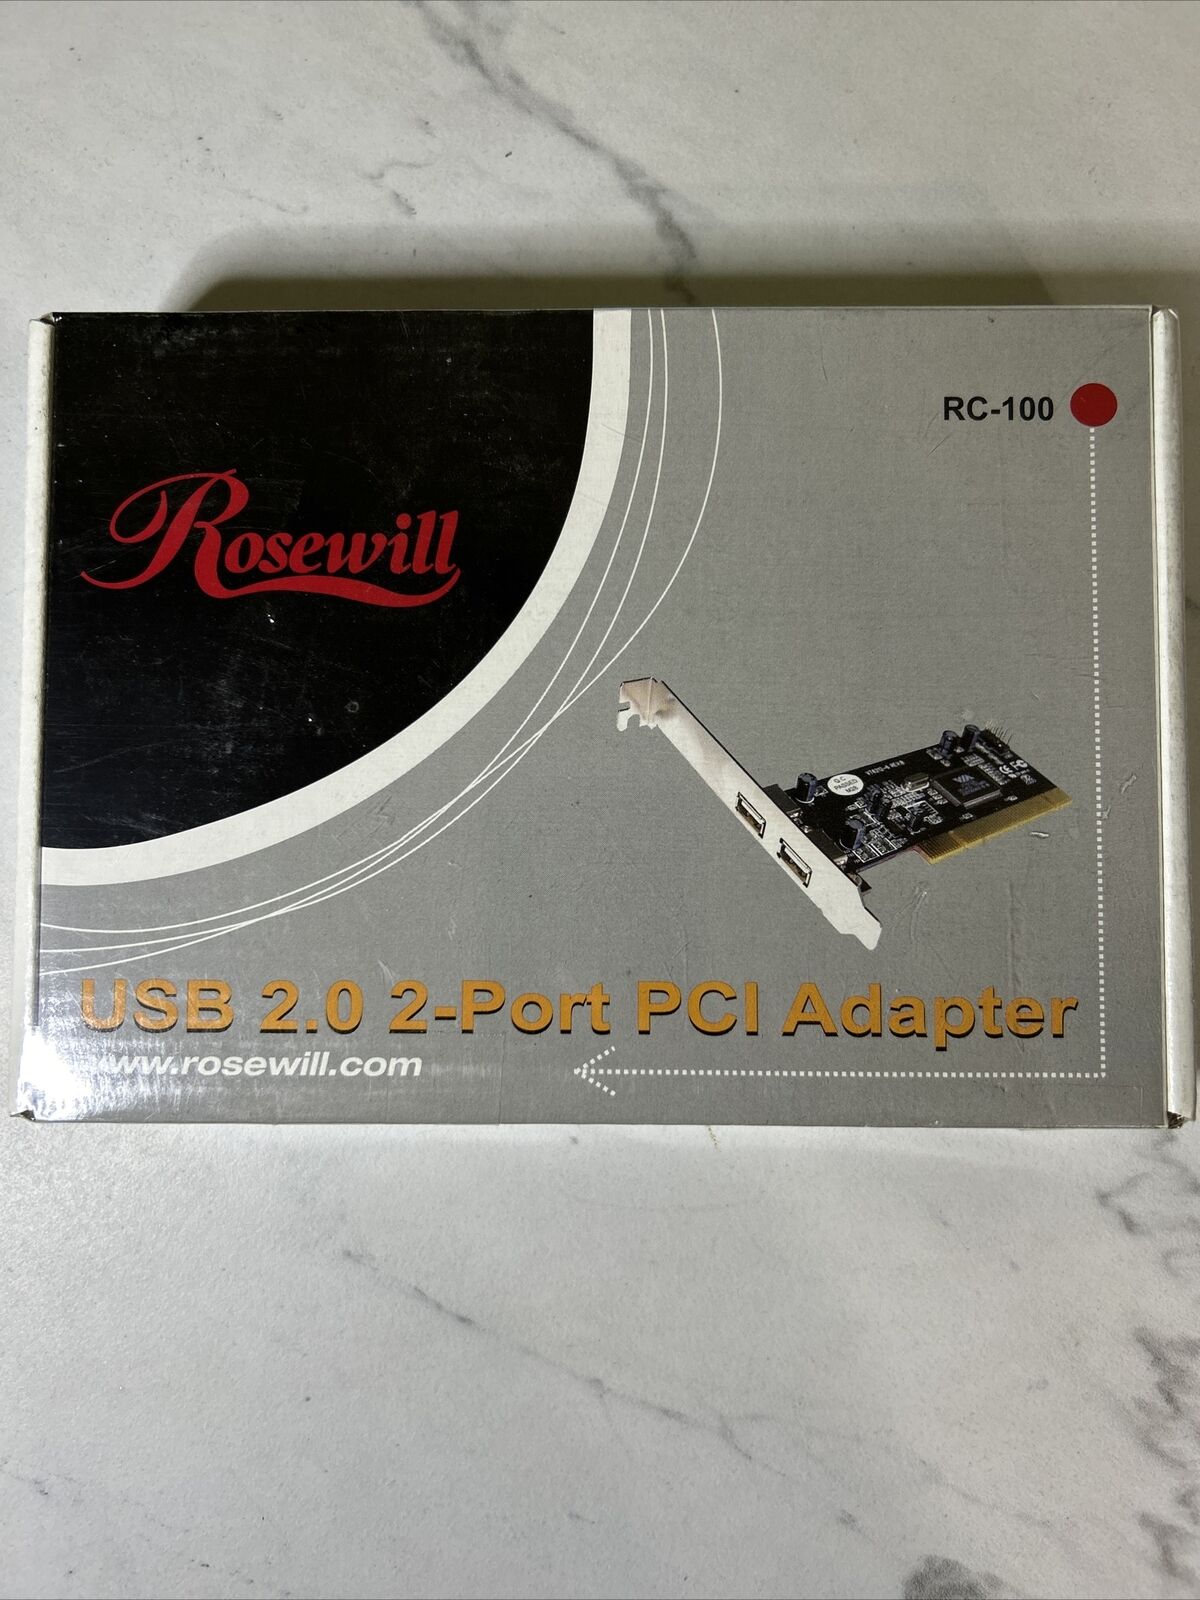 Rosewill RC-100 USB 2.0 2-Port PCI Adapter - NEW